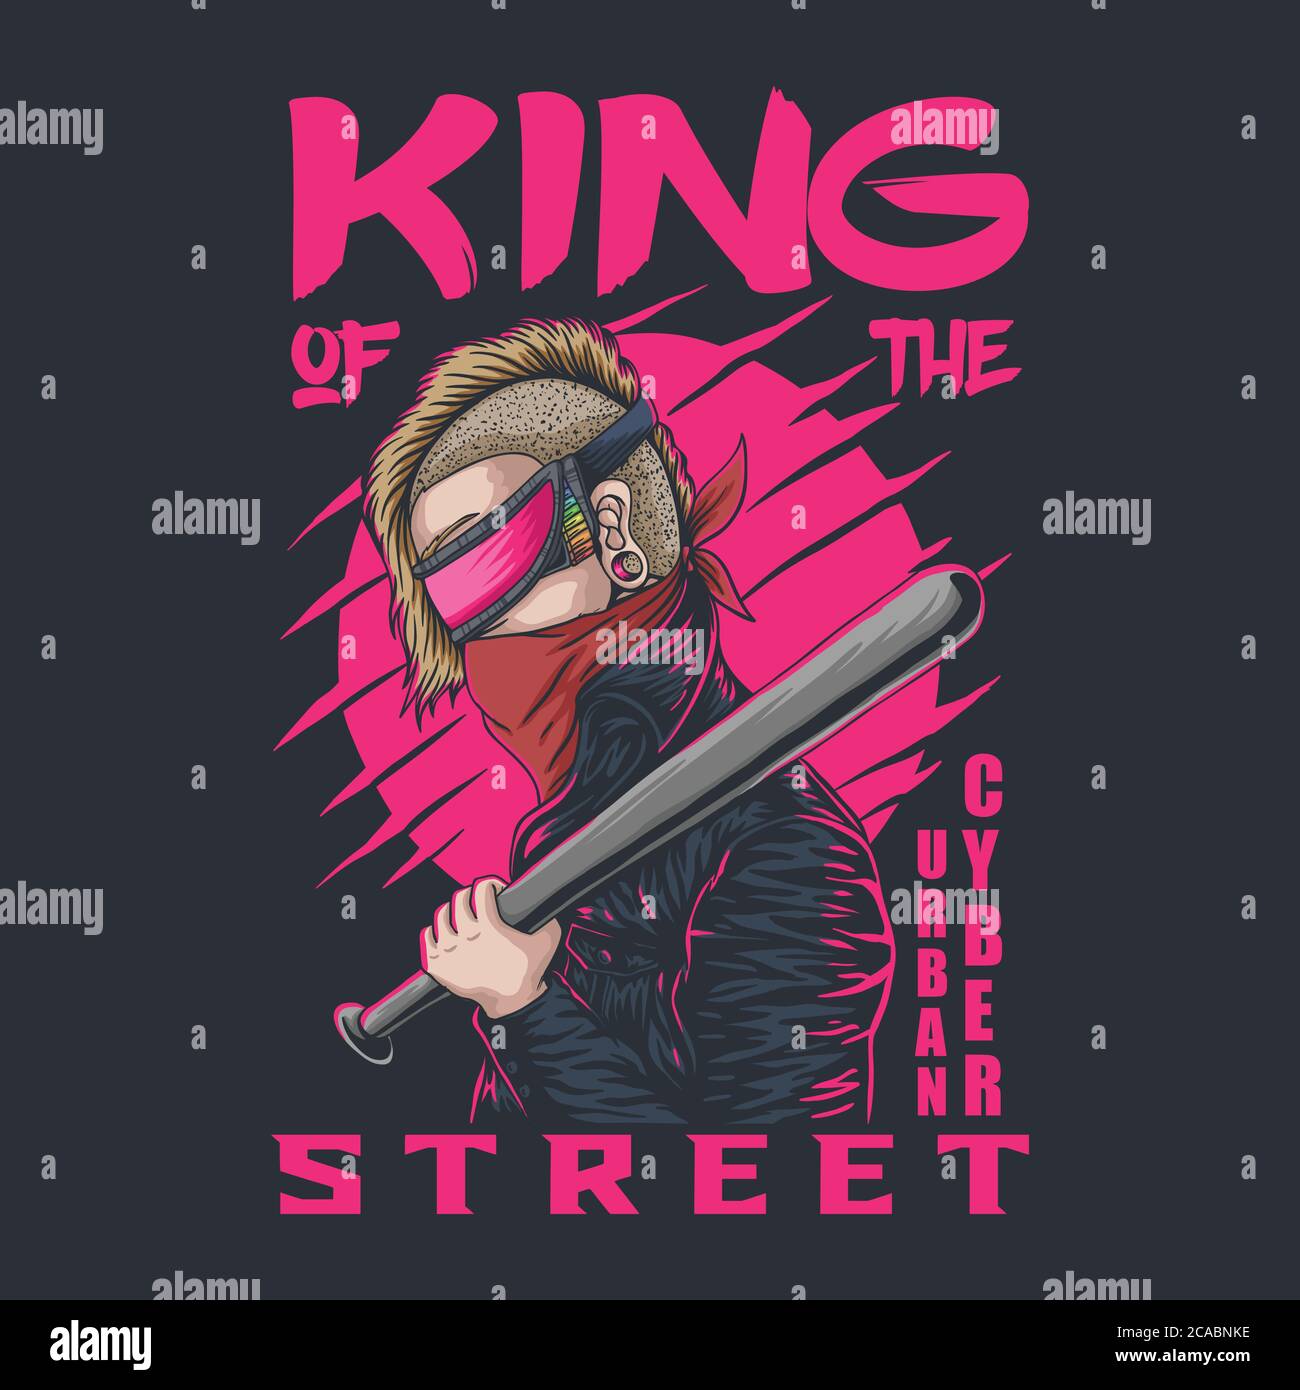 Cyber Urban king of the street vector illustration for your company or brand Stock Vector